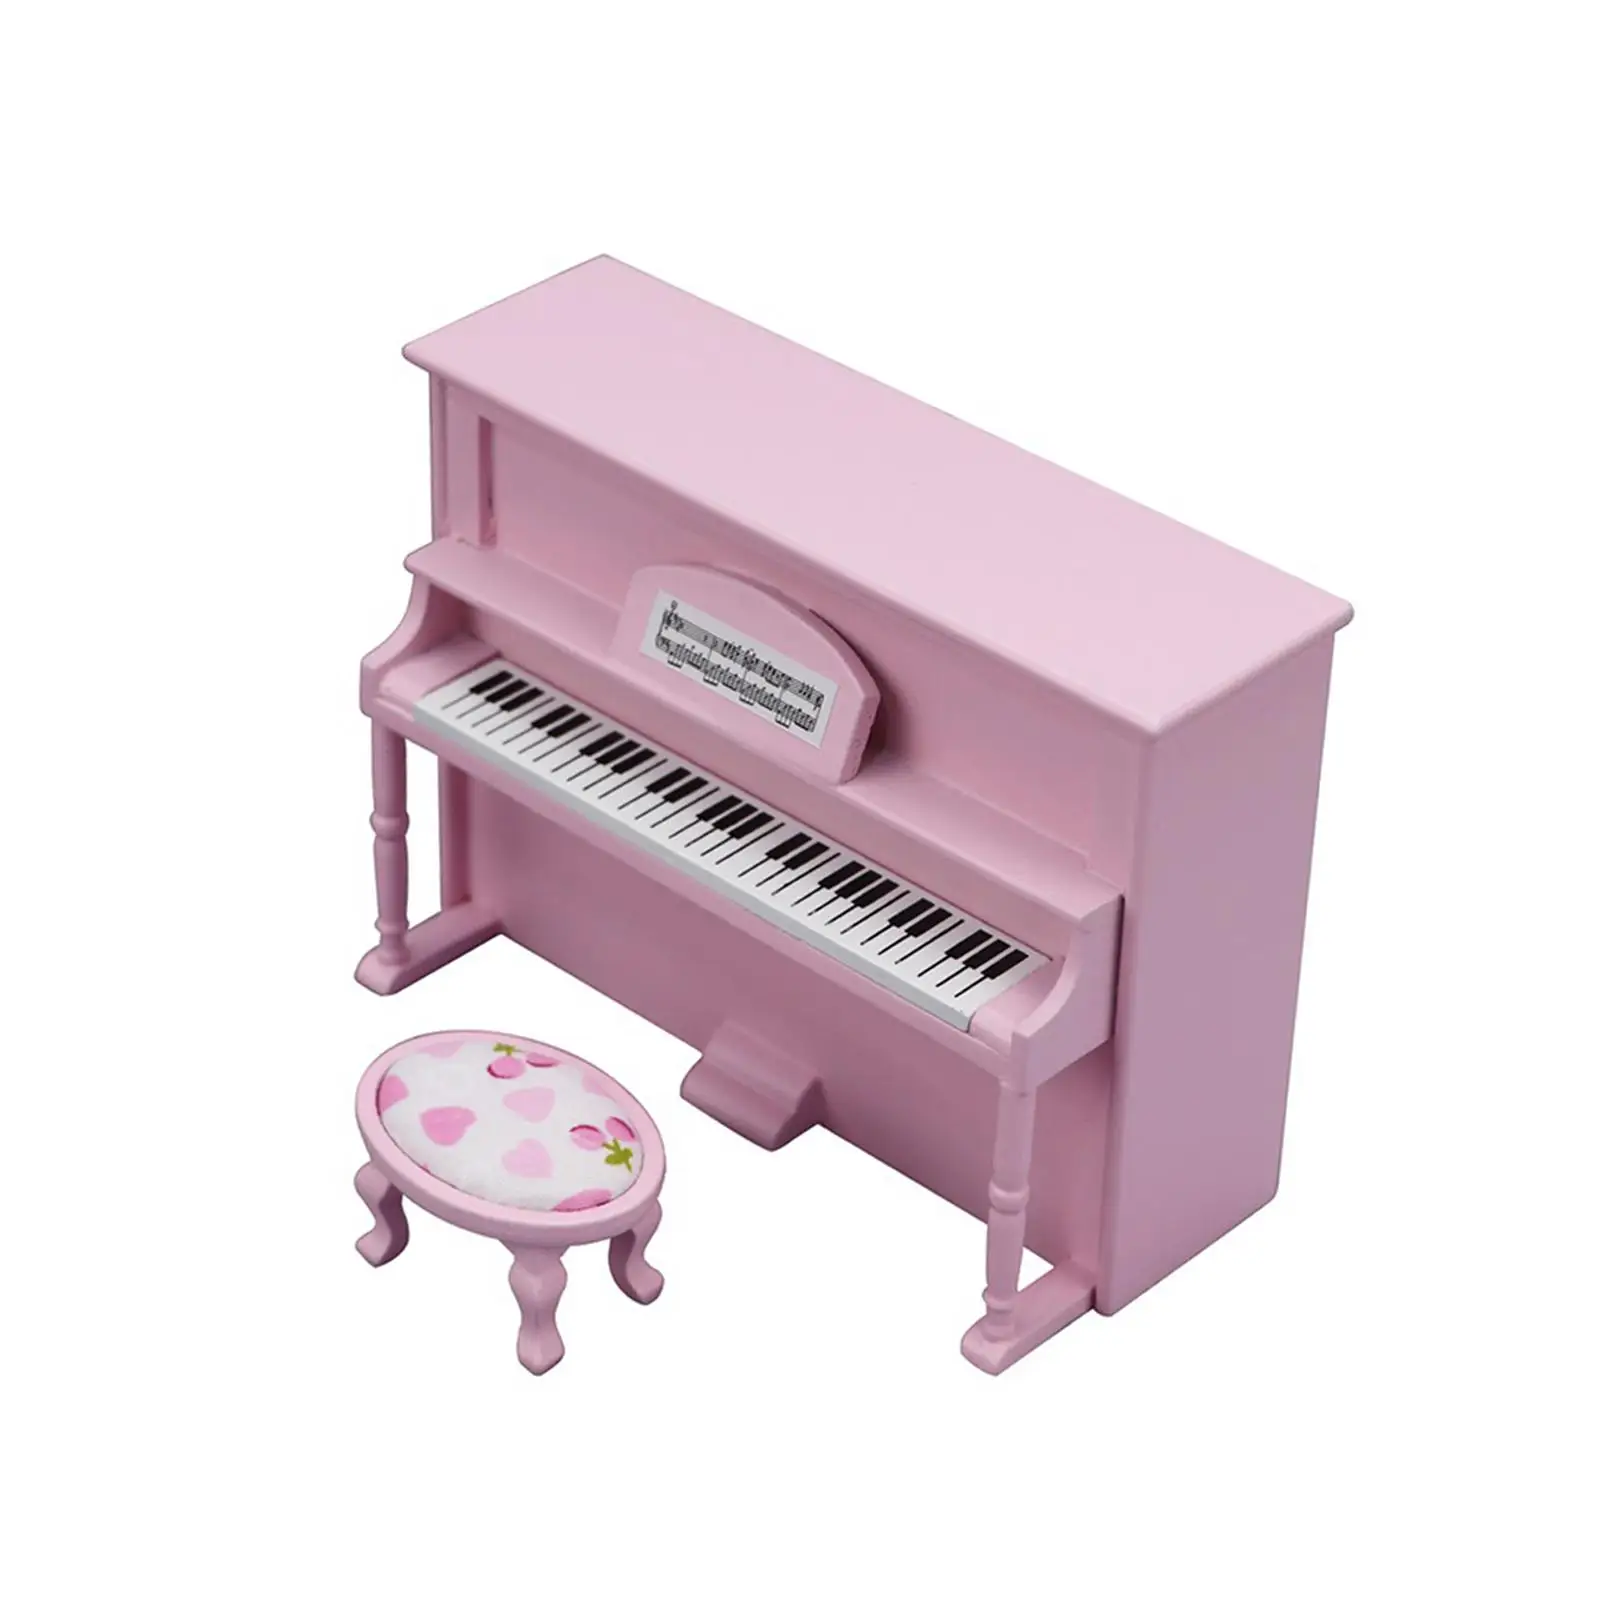 Miniature Piano Model with Stool Accessories Toys Doll House Furniture Living Room Elegant Piano Decoration Ornaments